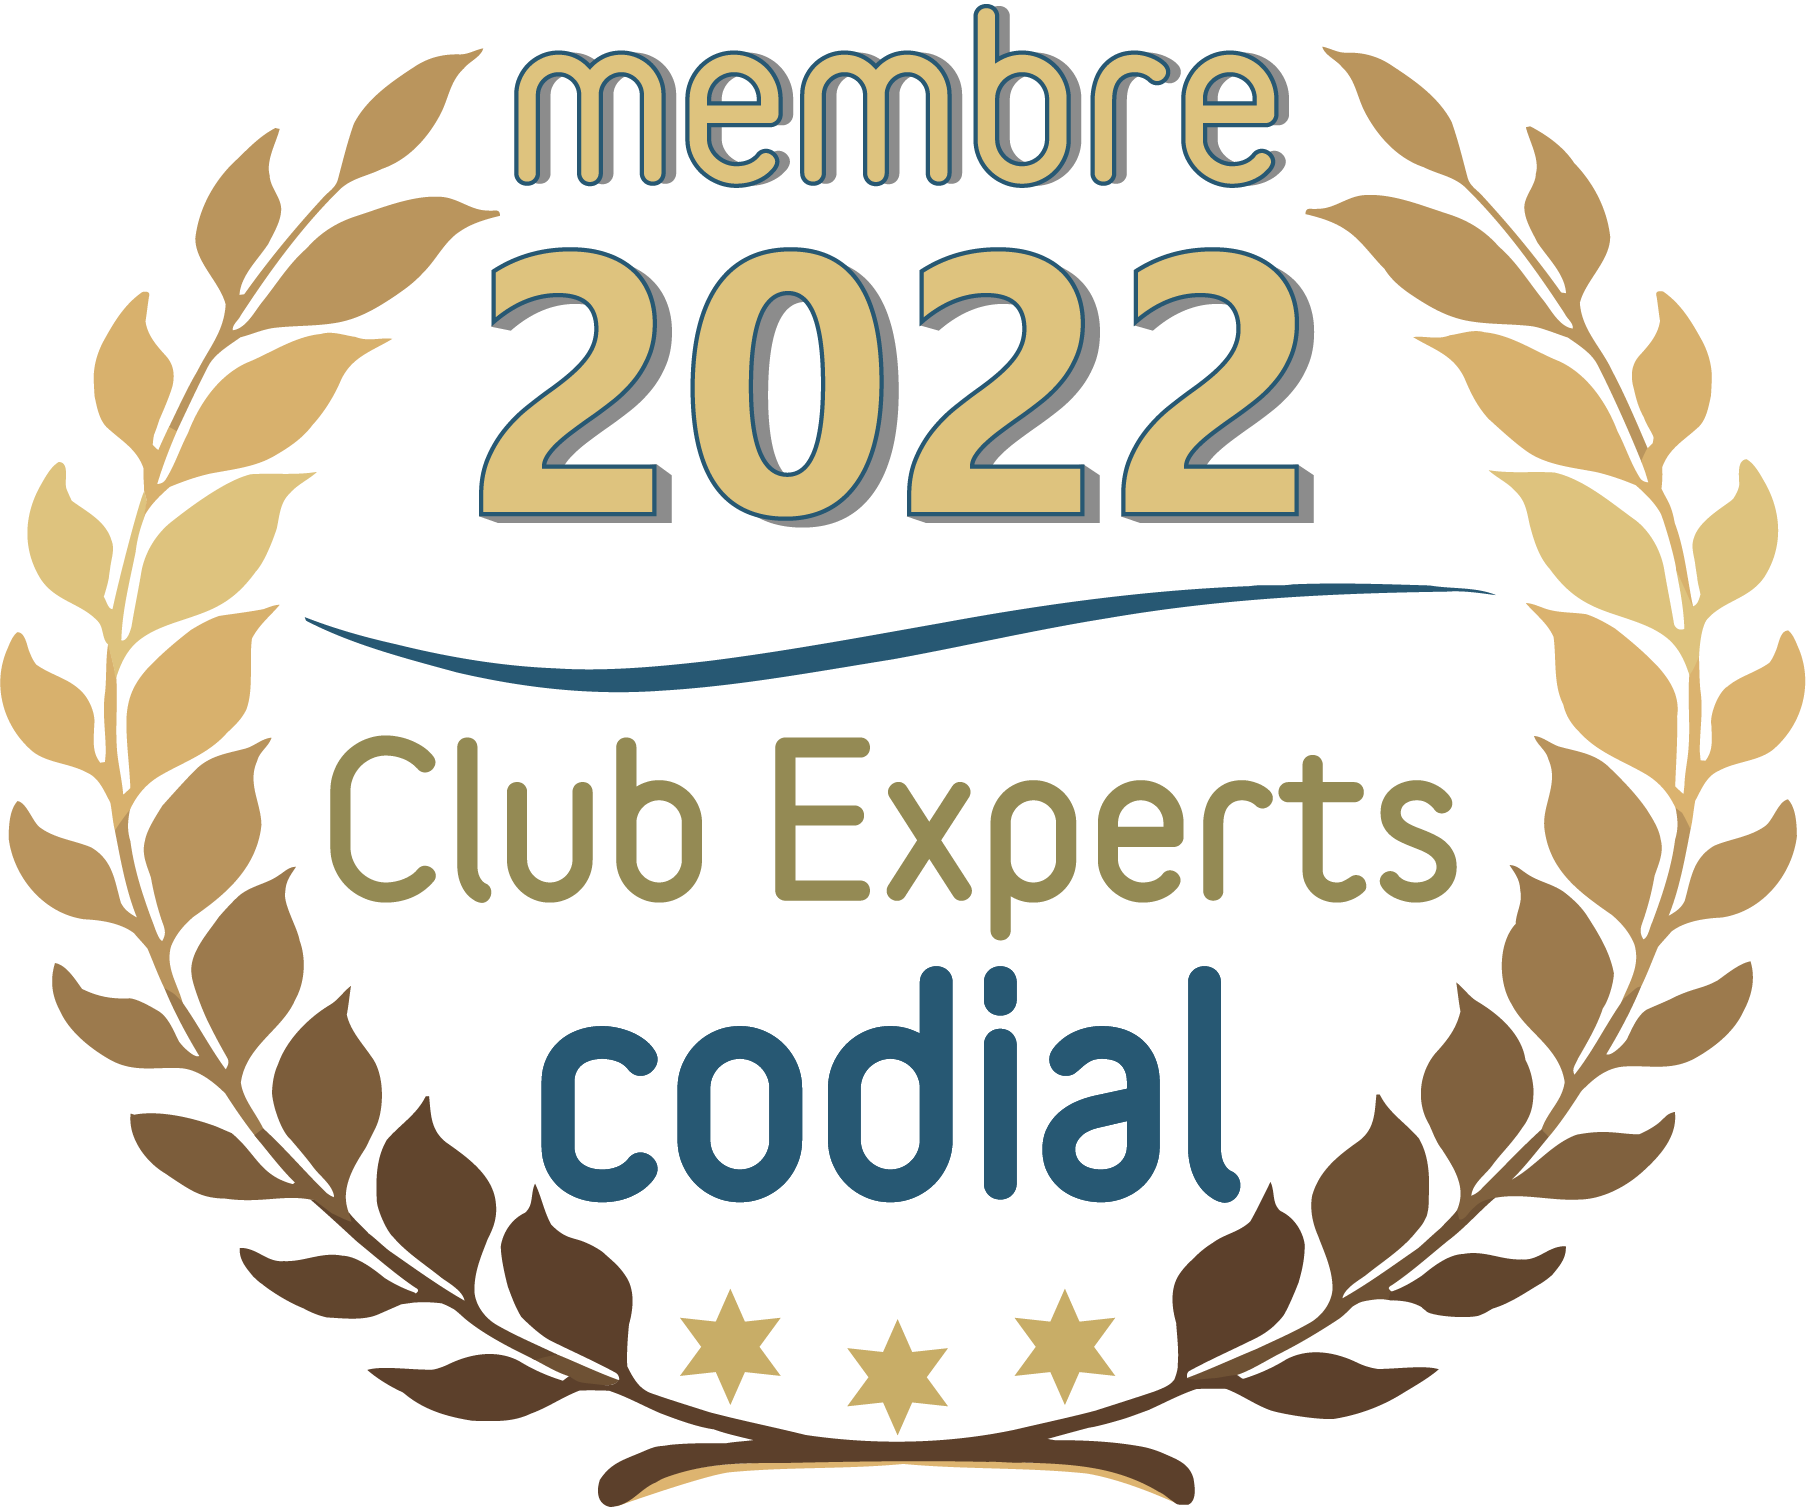 Le Club Experts Codial